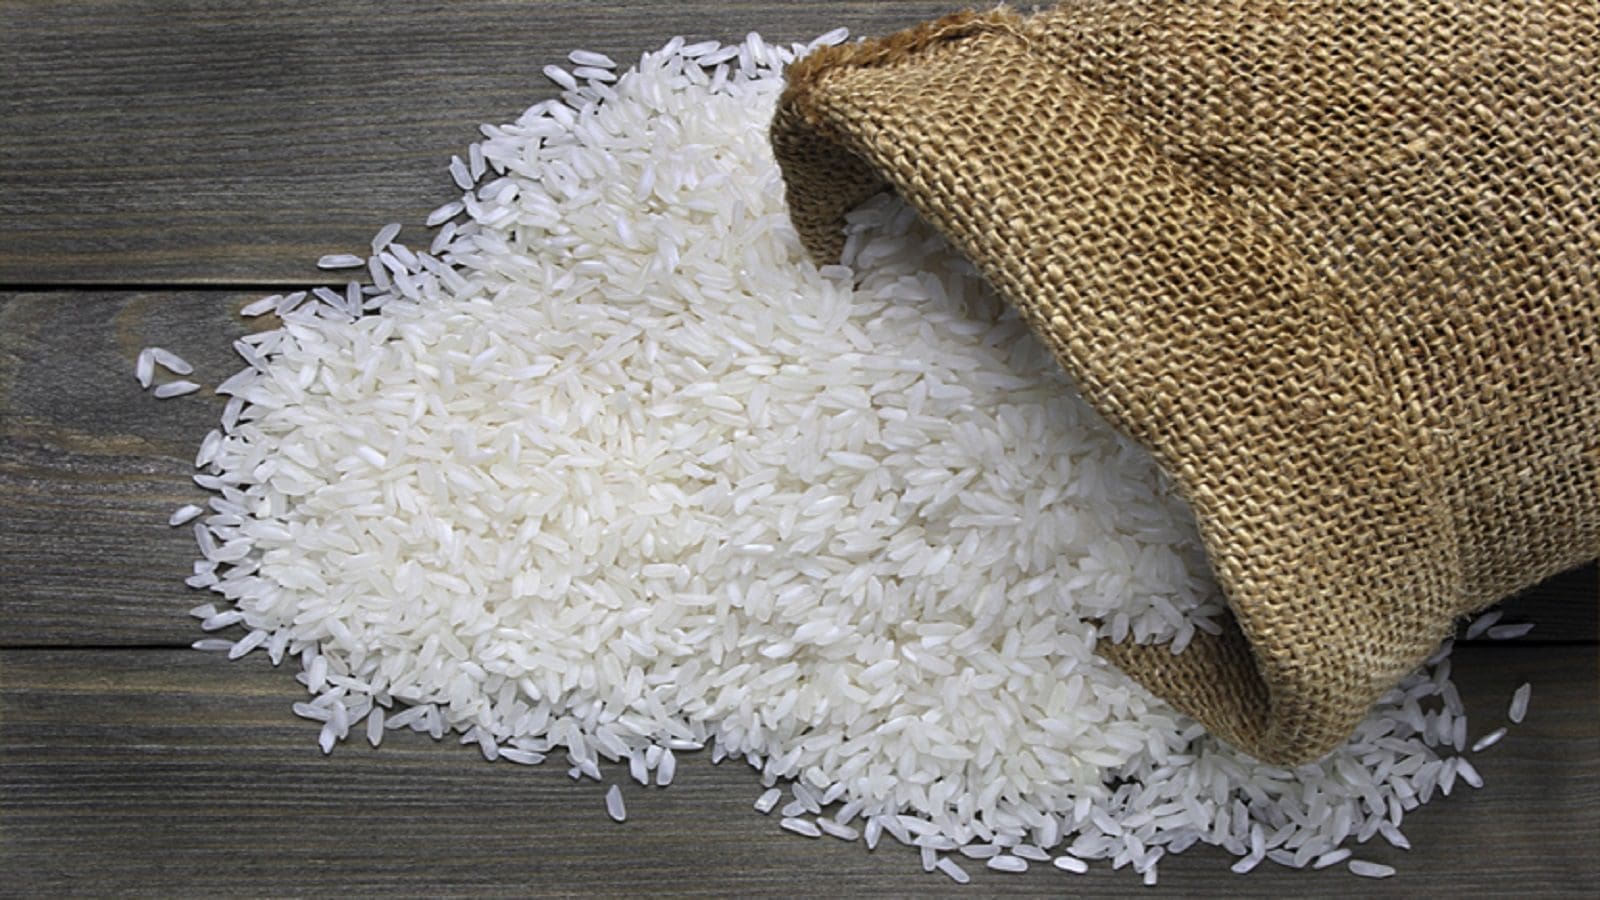 Côte d’Ivoire’s rice imports from China hit record high on the backdrop of India’s restrictions